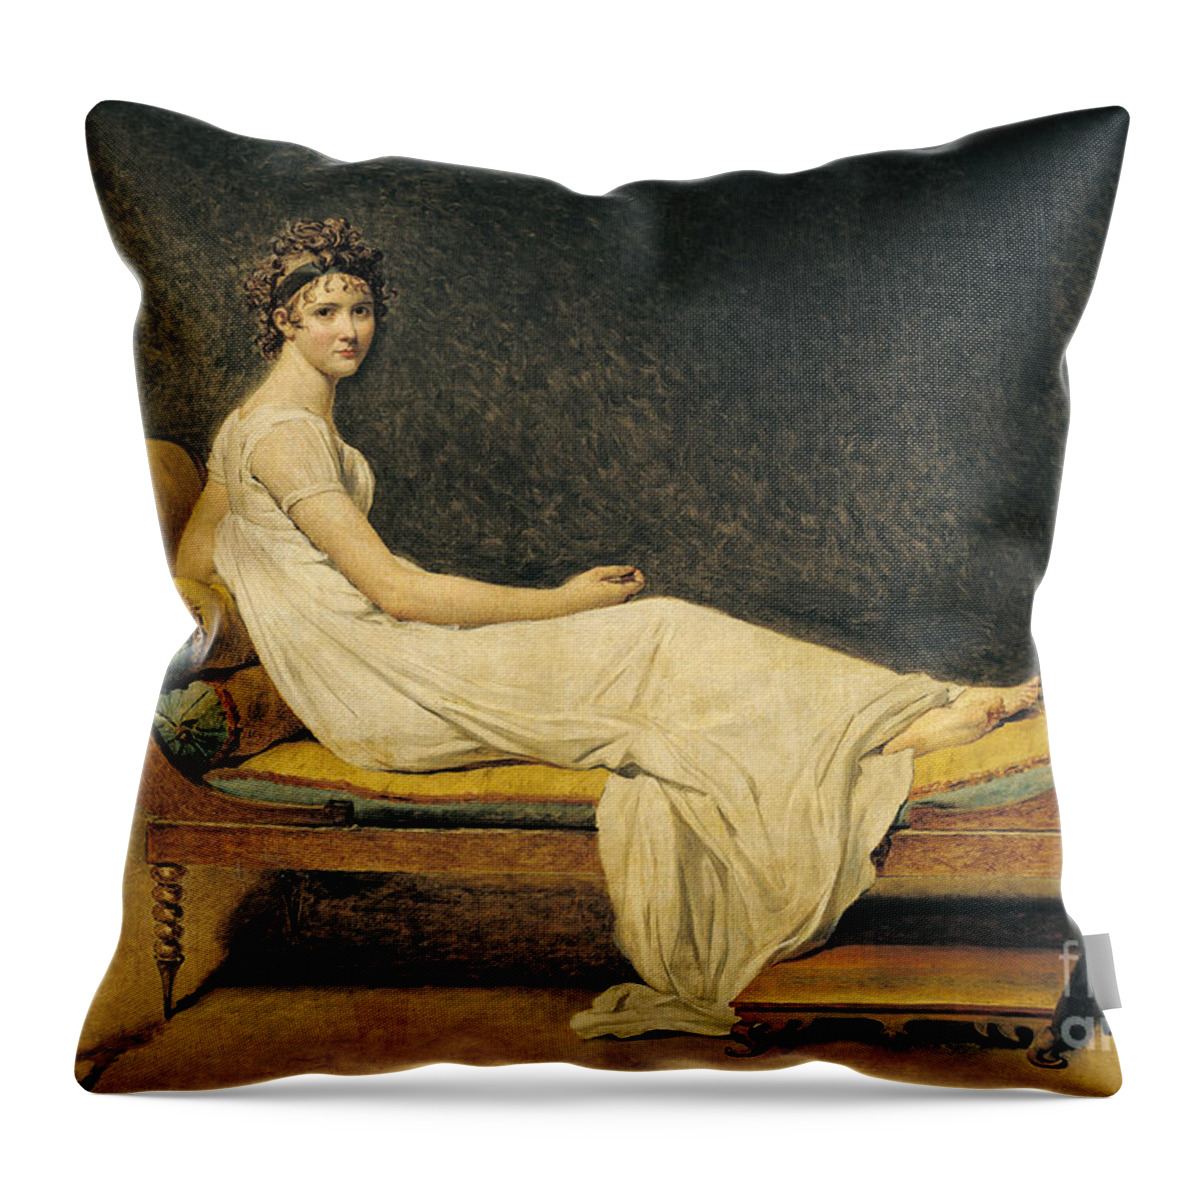 Portrait Throw Pillow featuring the painting Madame Recamier by Jacques Louis David